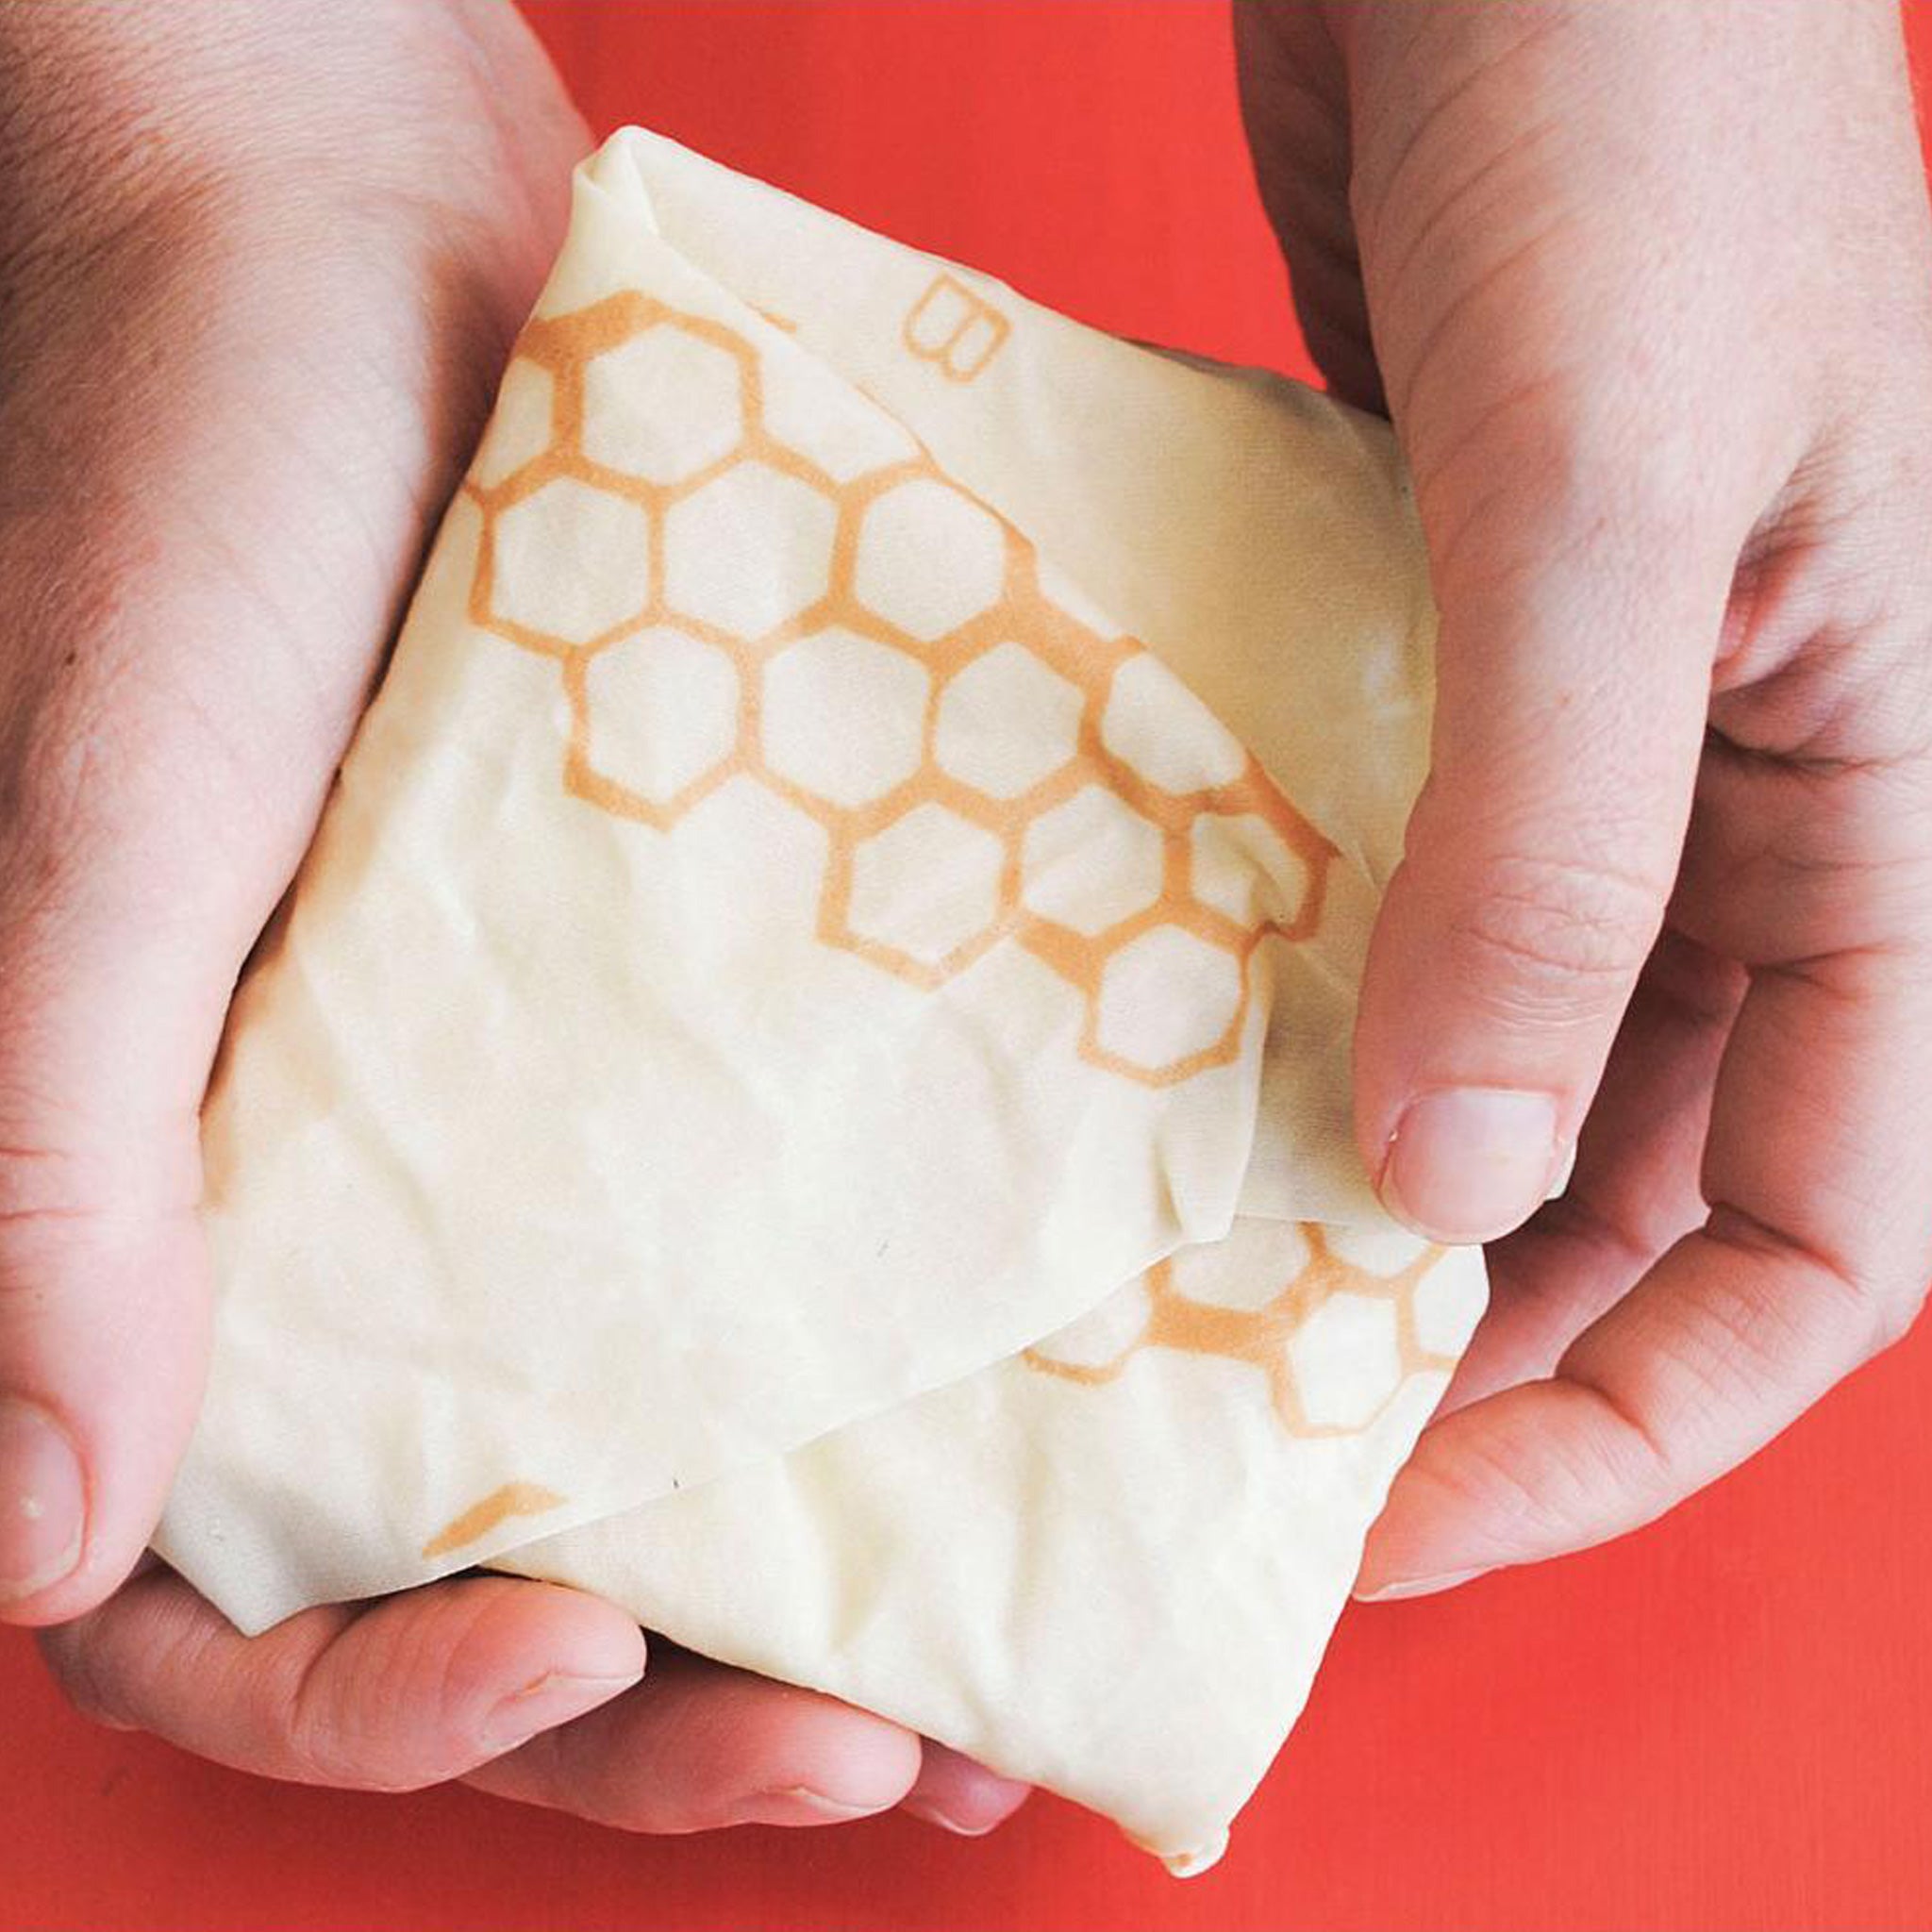 Bee's Wrap Review: What To Know Before You Buy